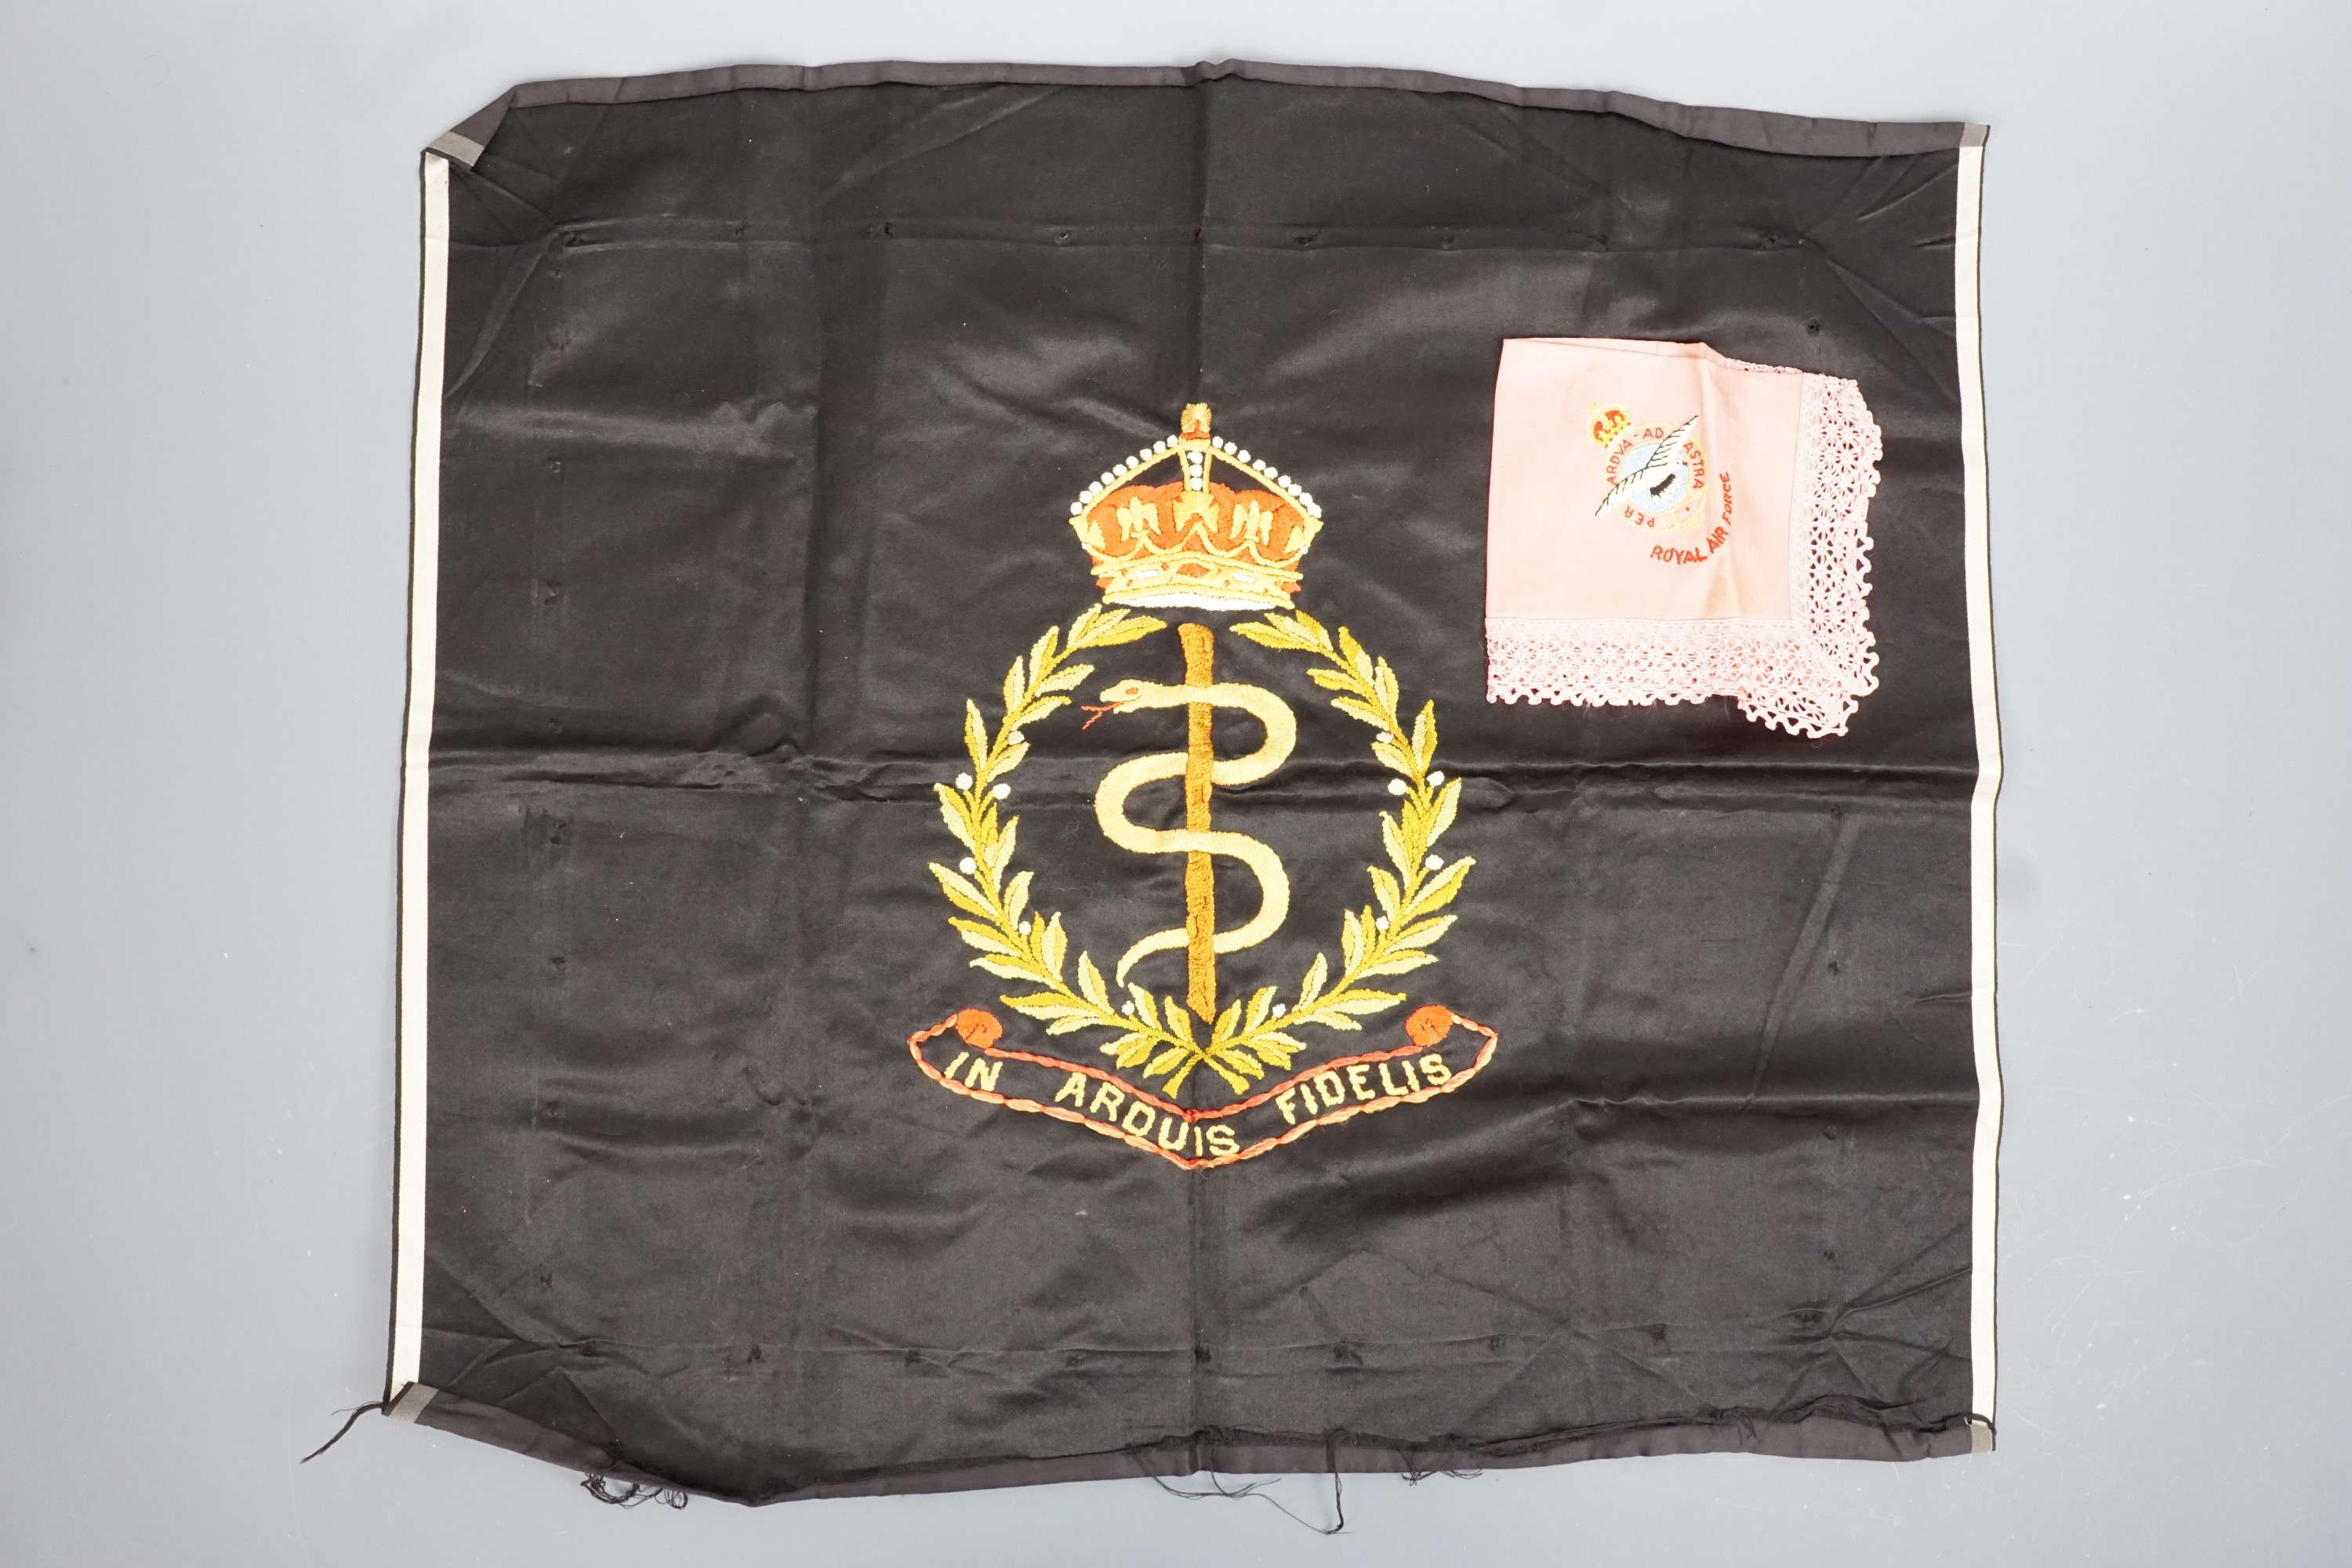 A Royal Army Medical Corps embroidery together with an RAF embroidered doily